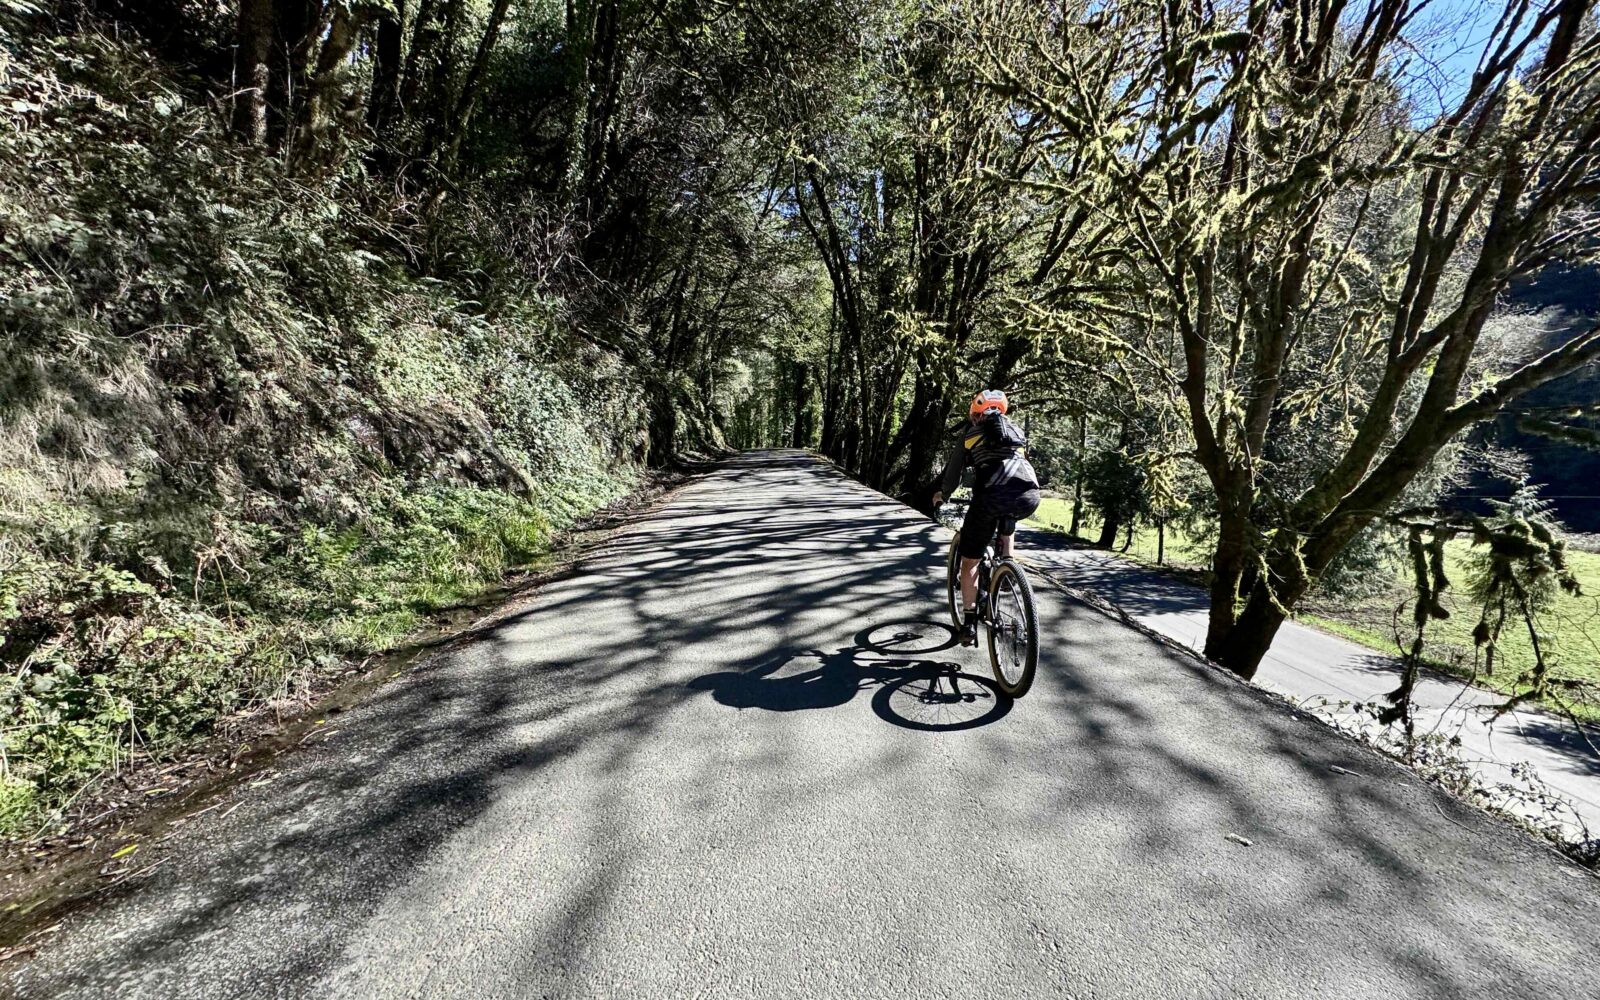 Gravel Girl on paved road near Coos Bay.